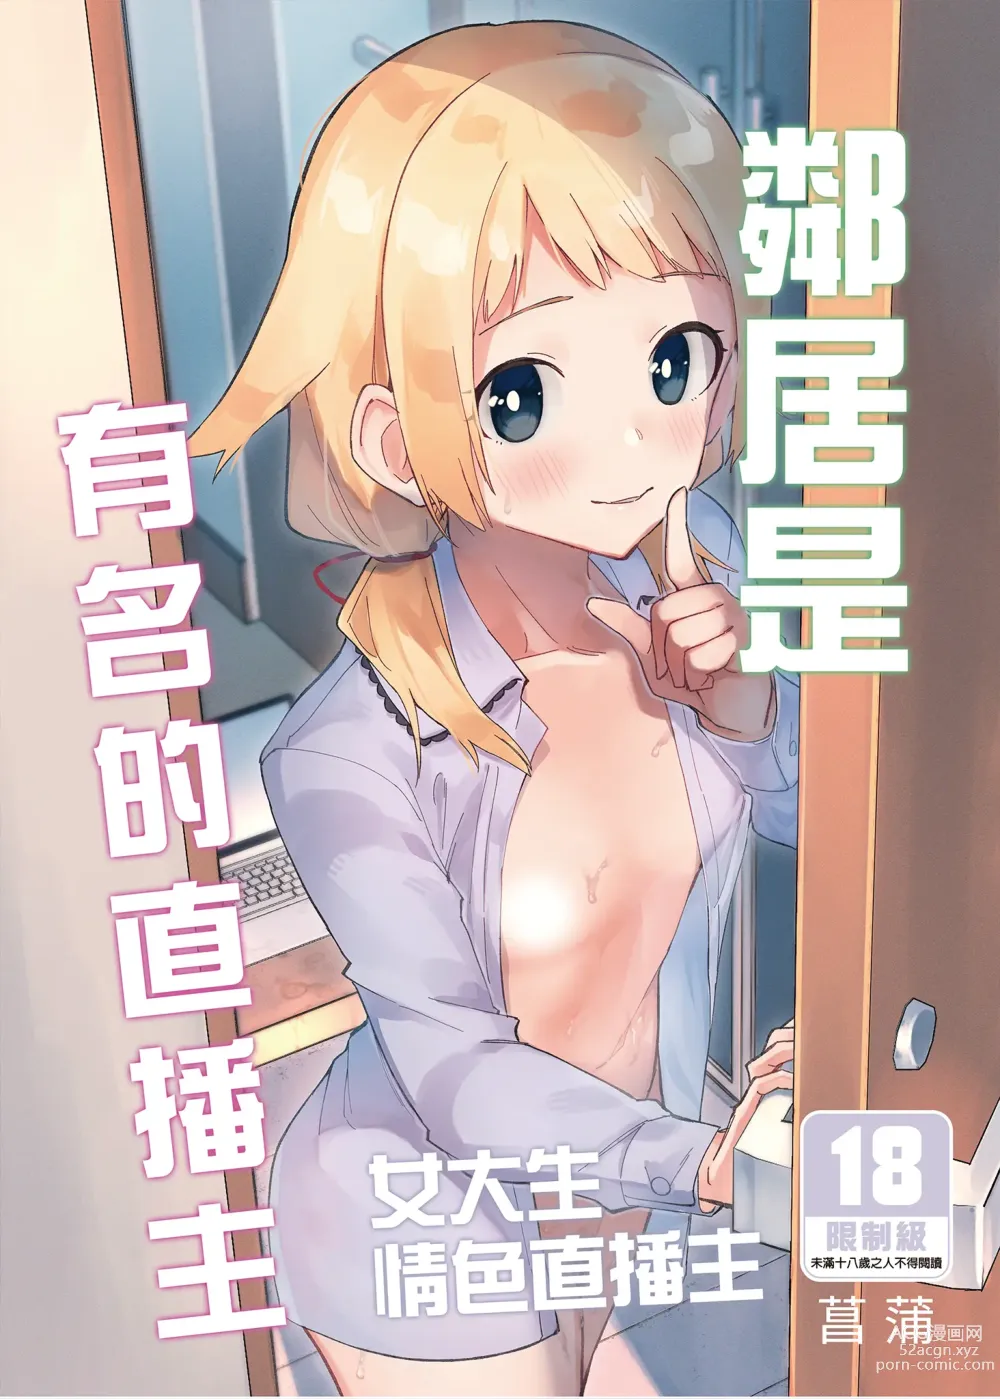 Page 1 of doujinshi 隣人は有名配信者